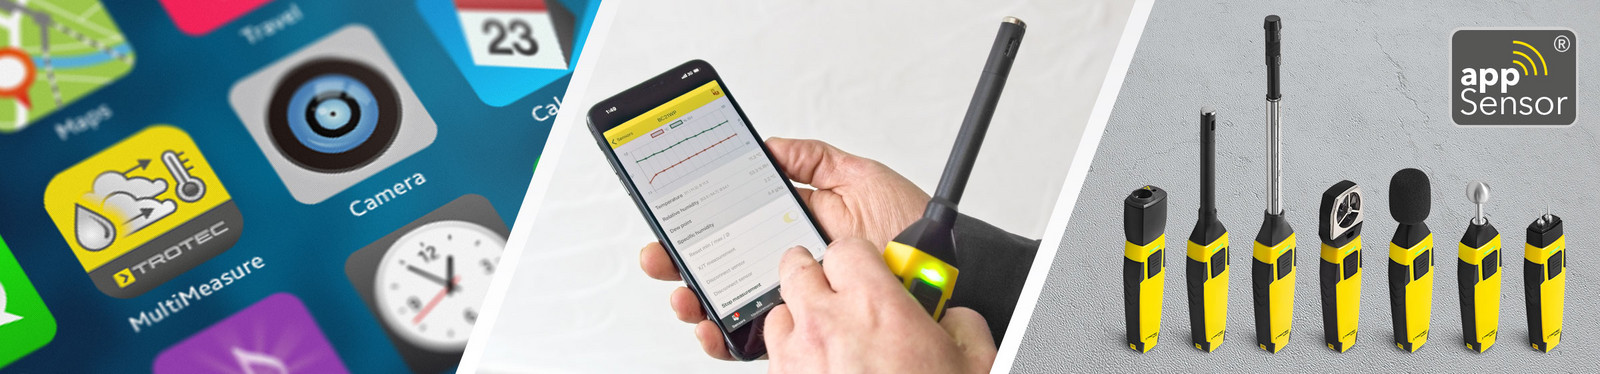 MultiMeasure Mobile – versatile app for the operation, evaluation and measured value indication of all Trotec appSensors